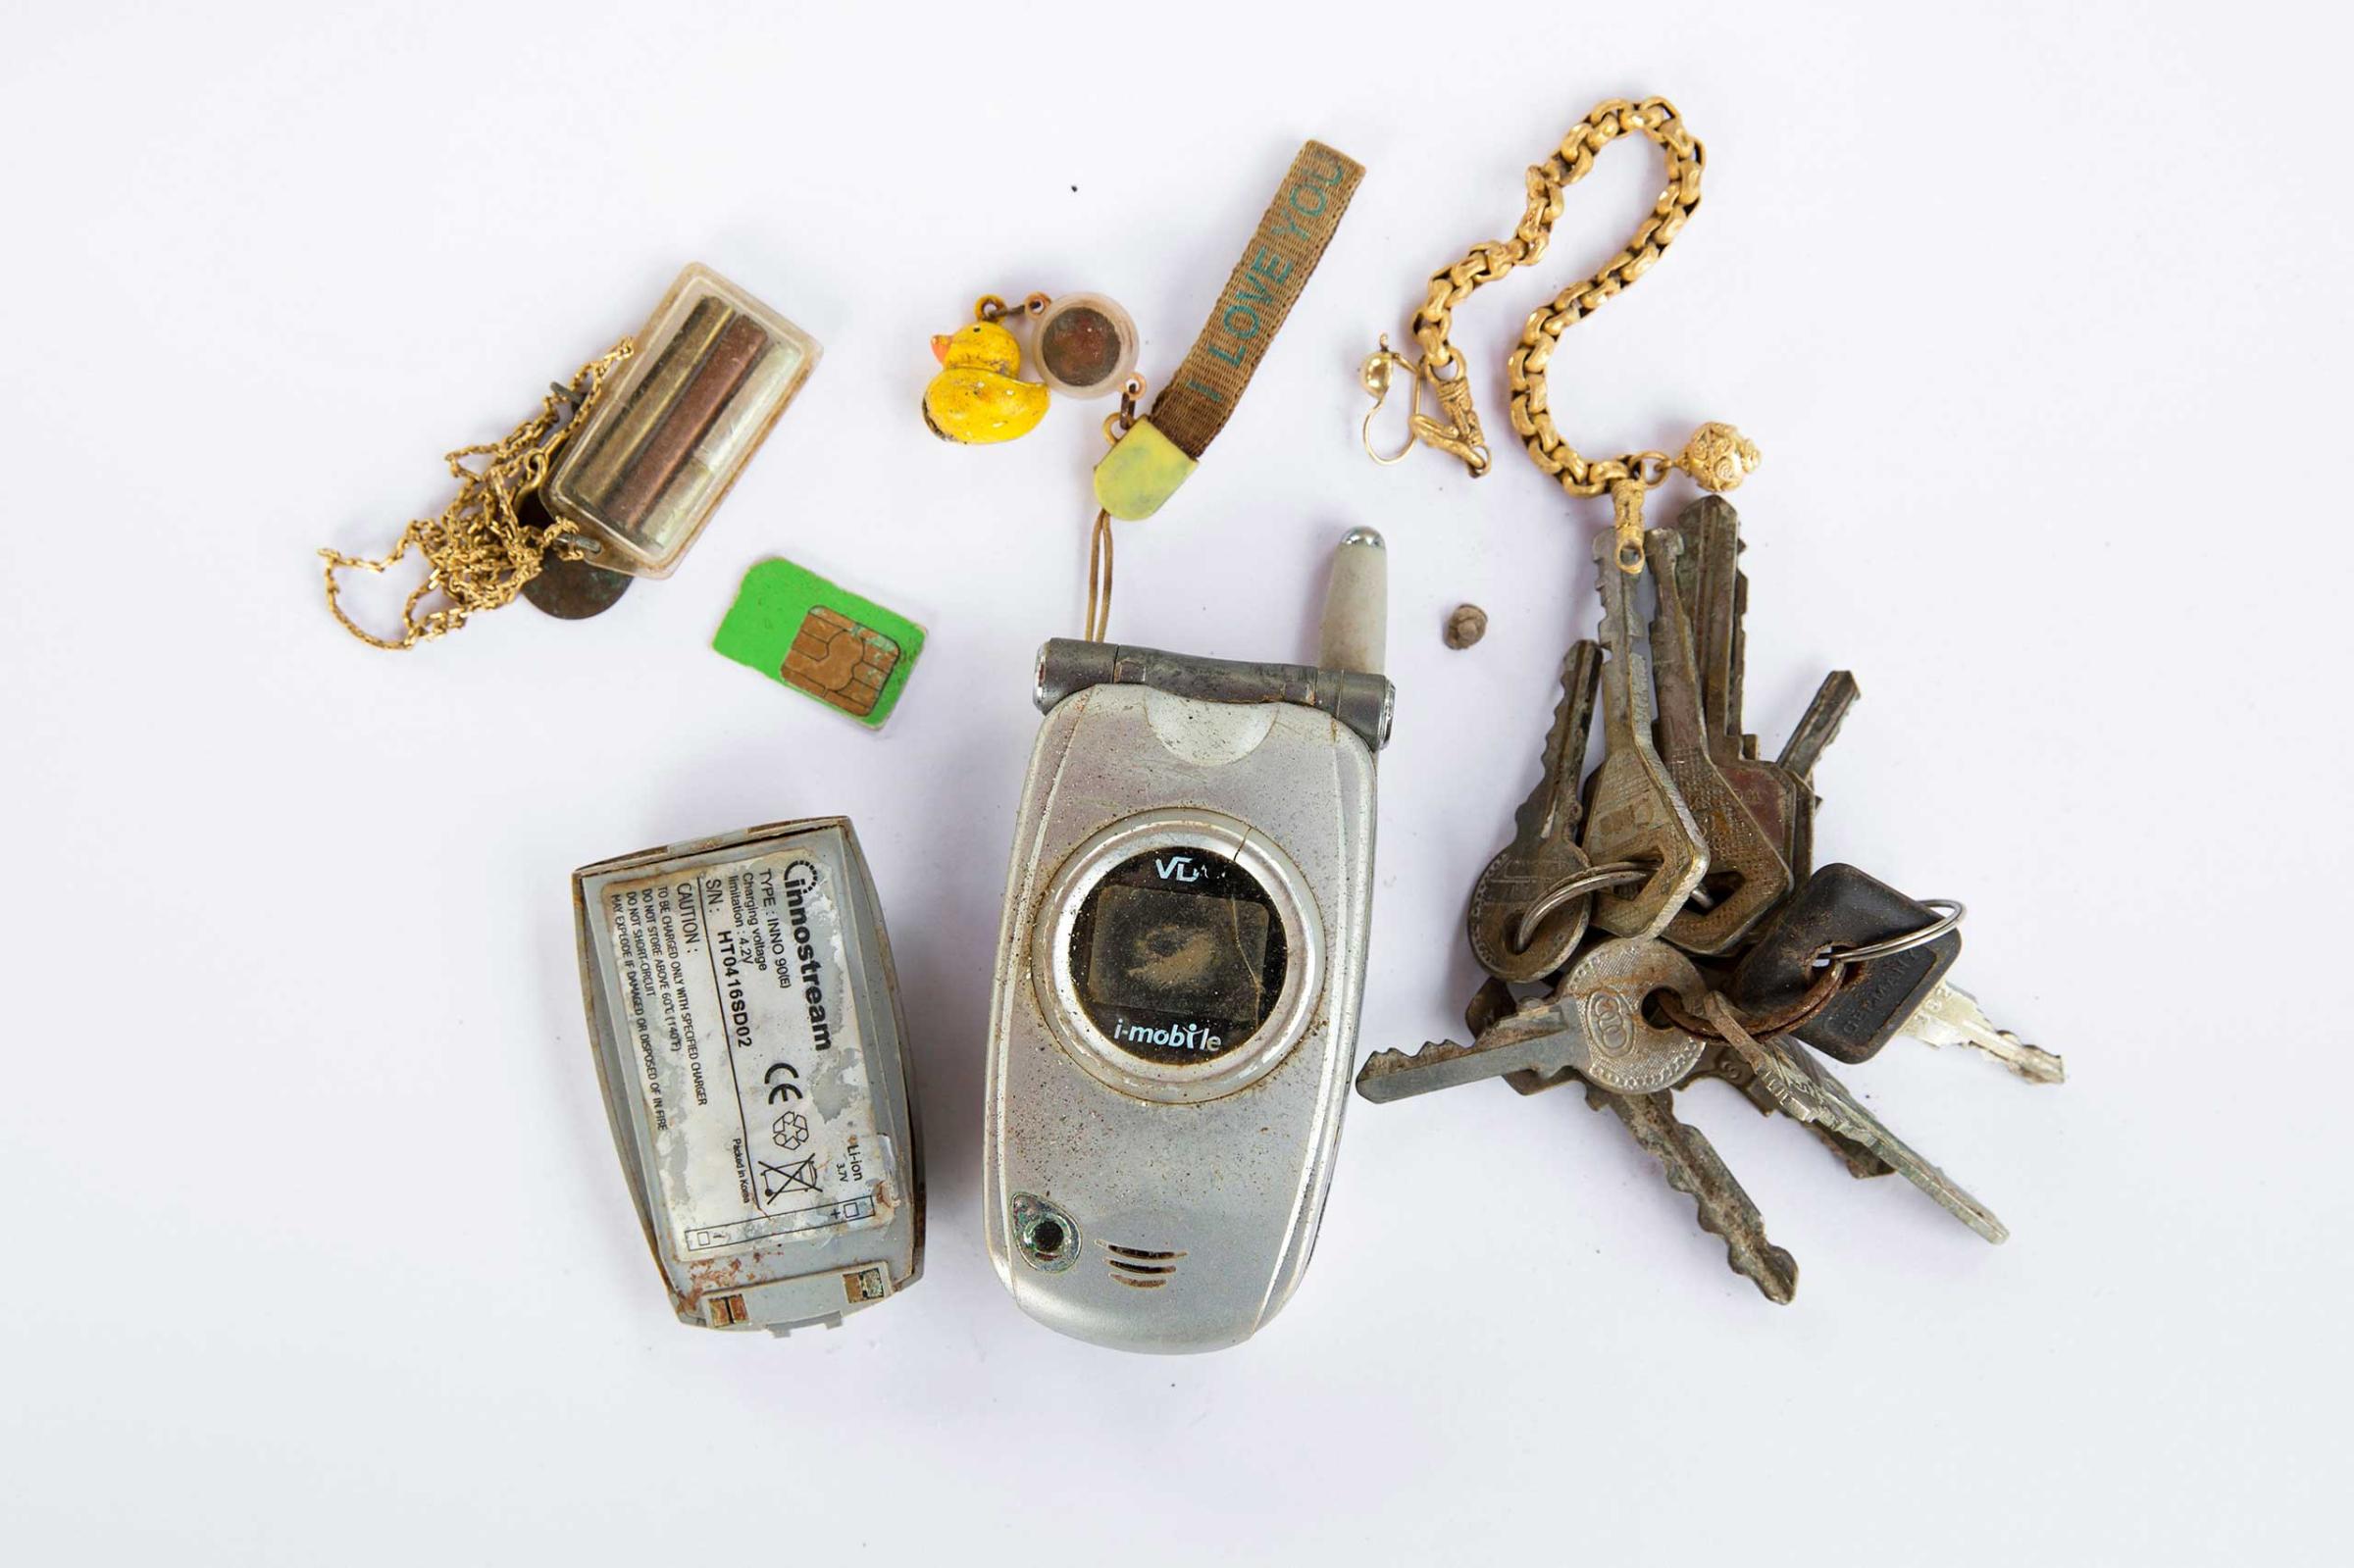 Personal possessions of 2004 tsunami victims are arranged to be photographed outside a police station in Takua Pa